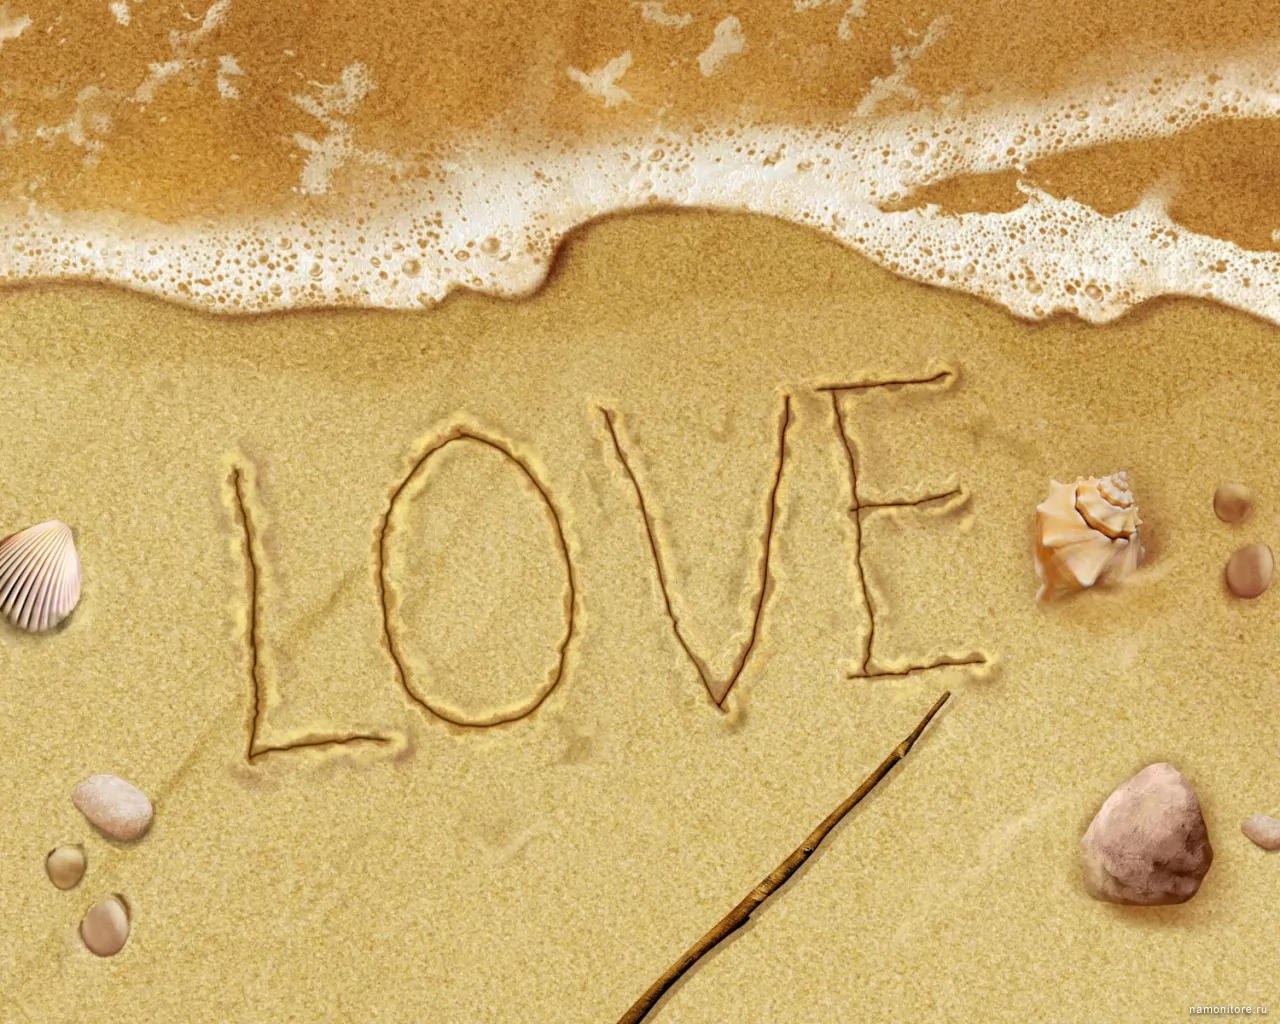 Inscription on sand, brown, drawed, love x